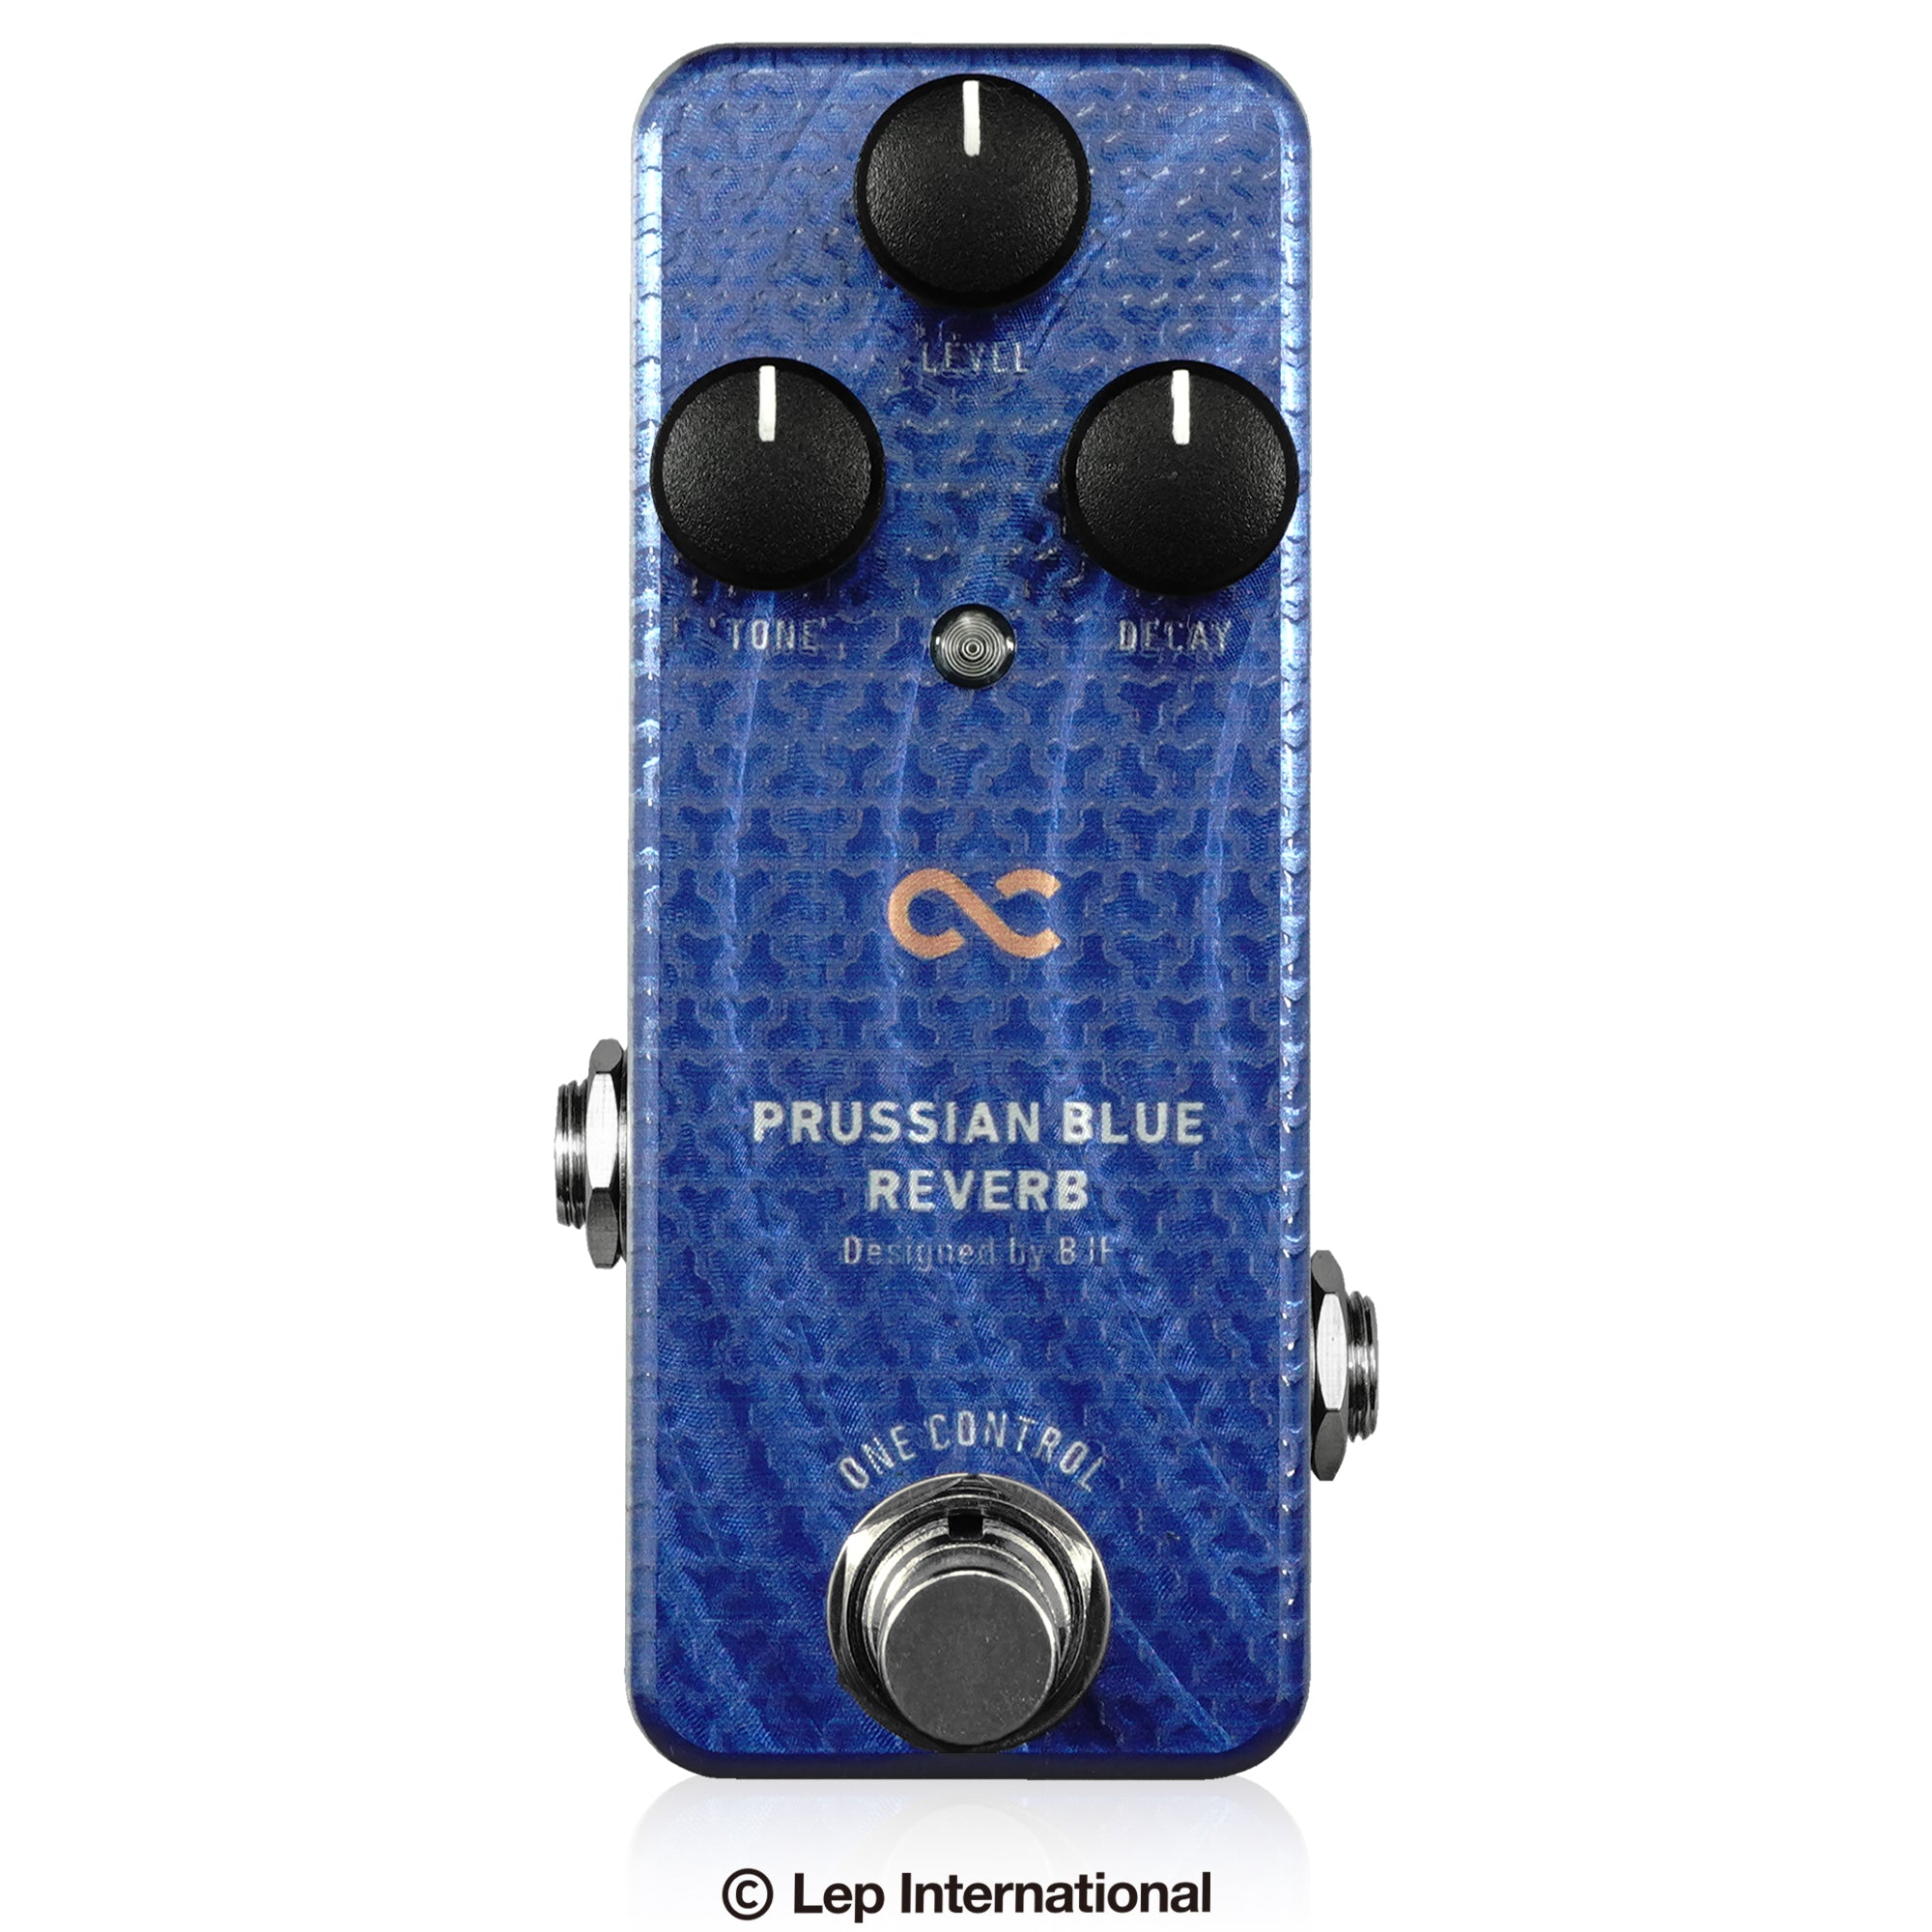 Prussian Blue Reverb | www.trevires.be